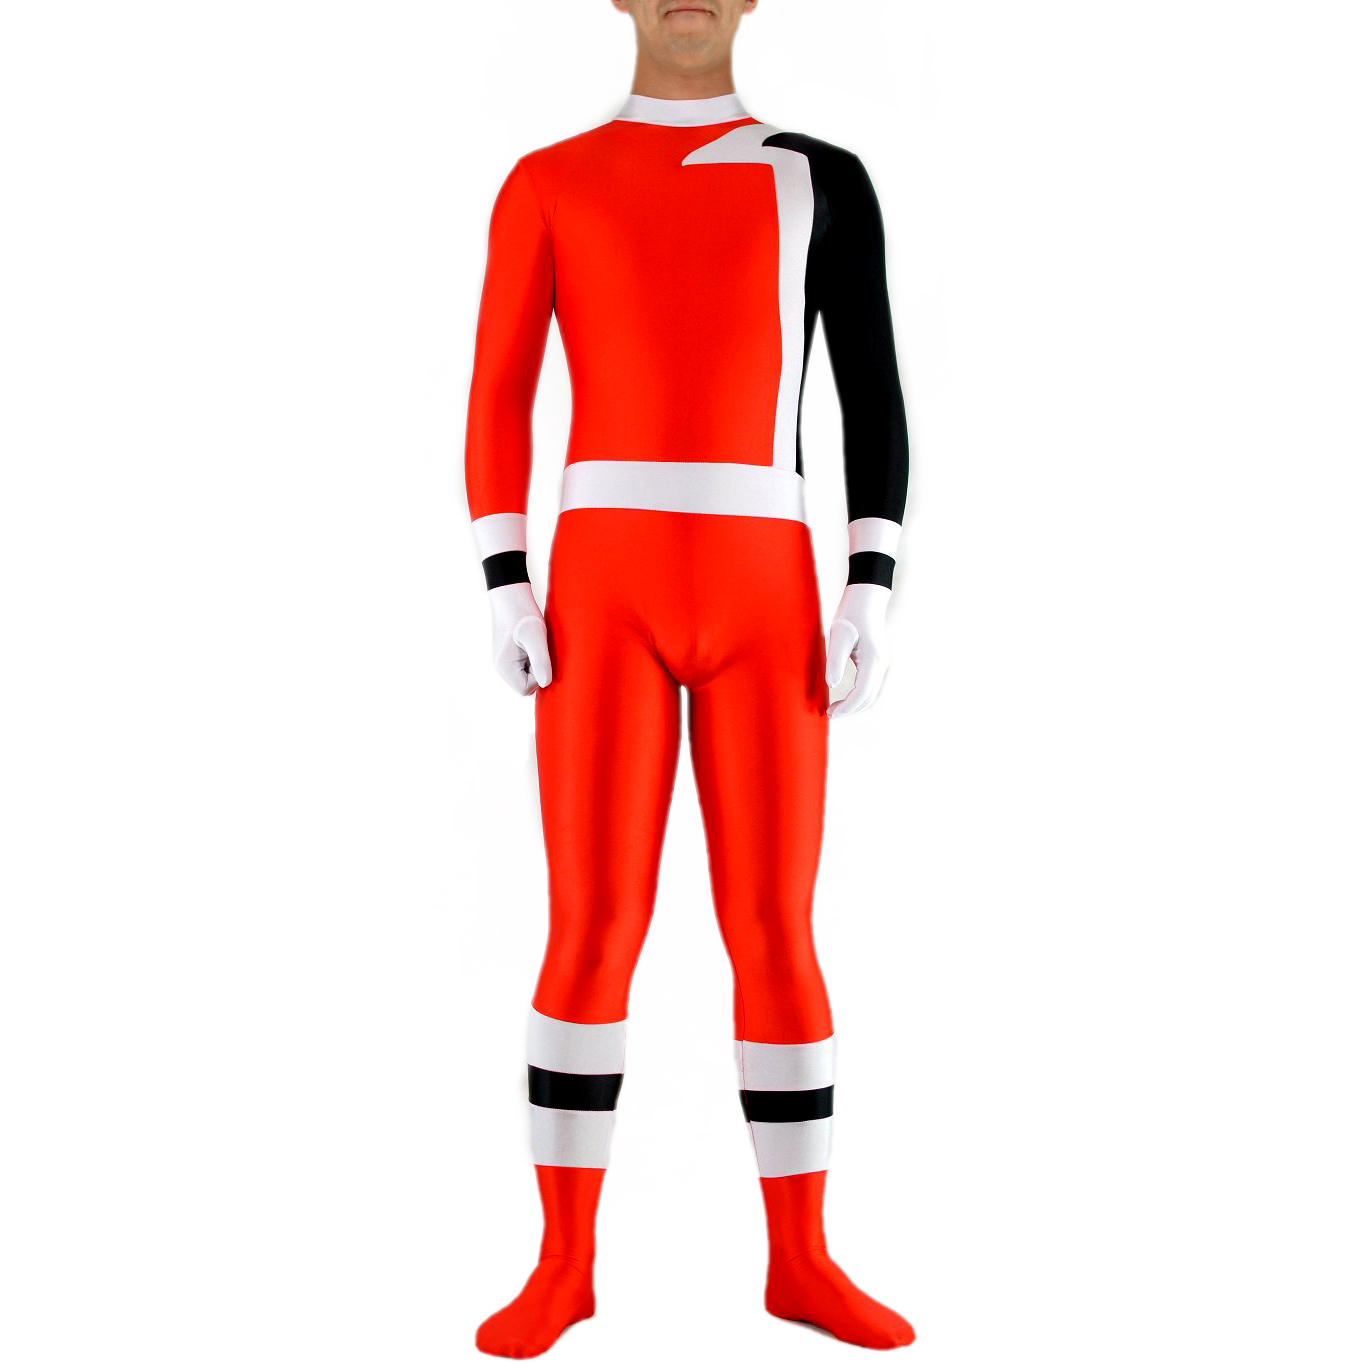 Unisex-Red White and Black Lycra Spandex Back Zipper Catsuit (PS